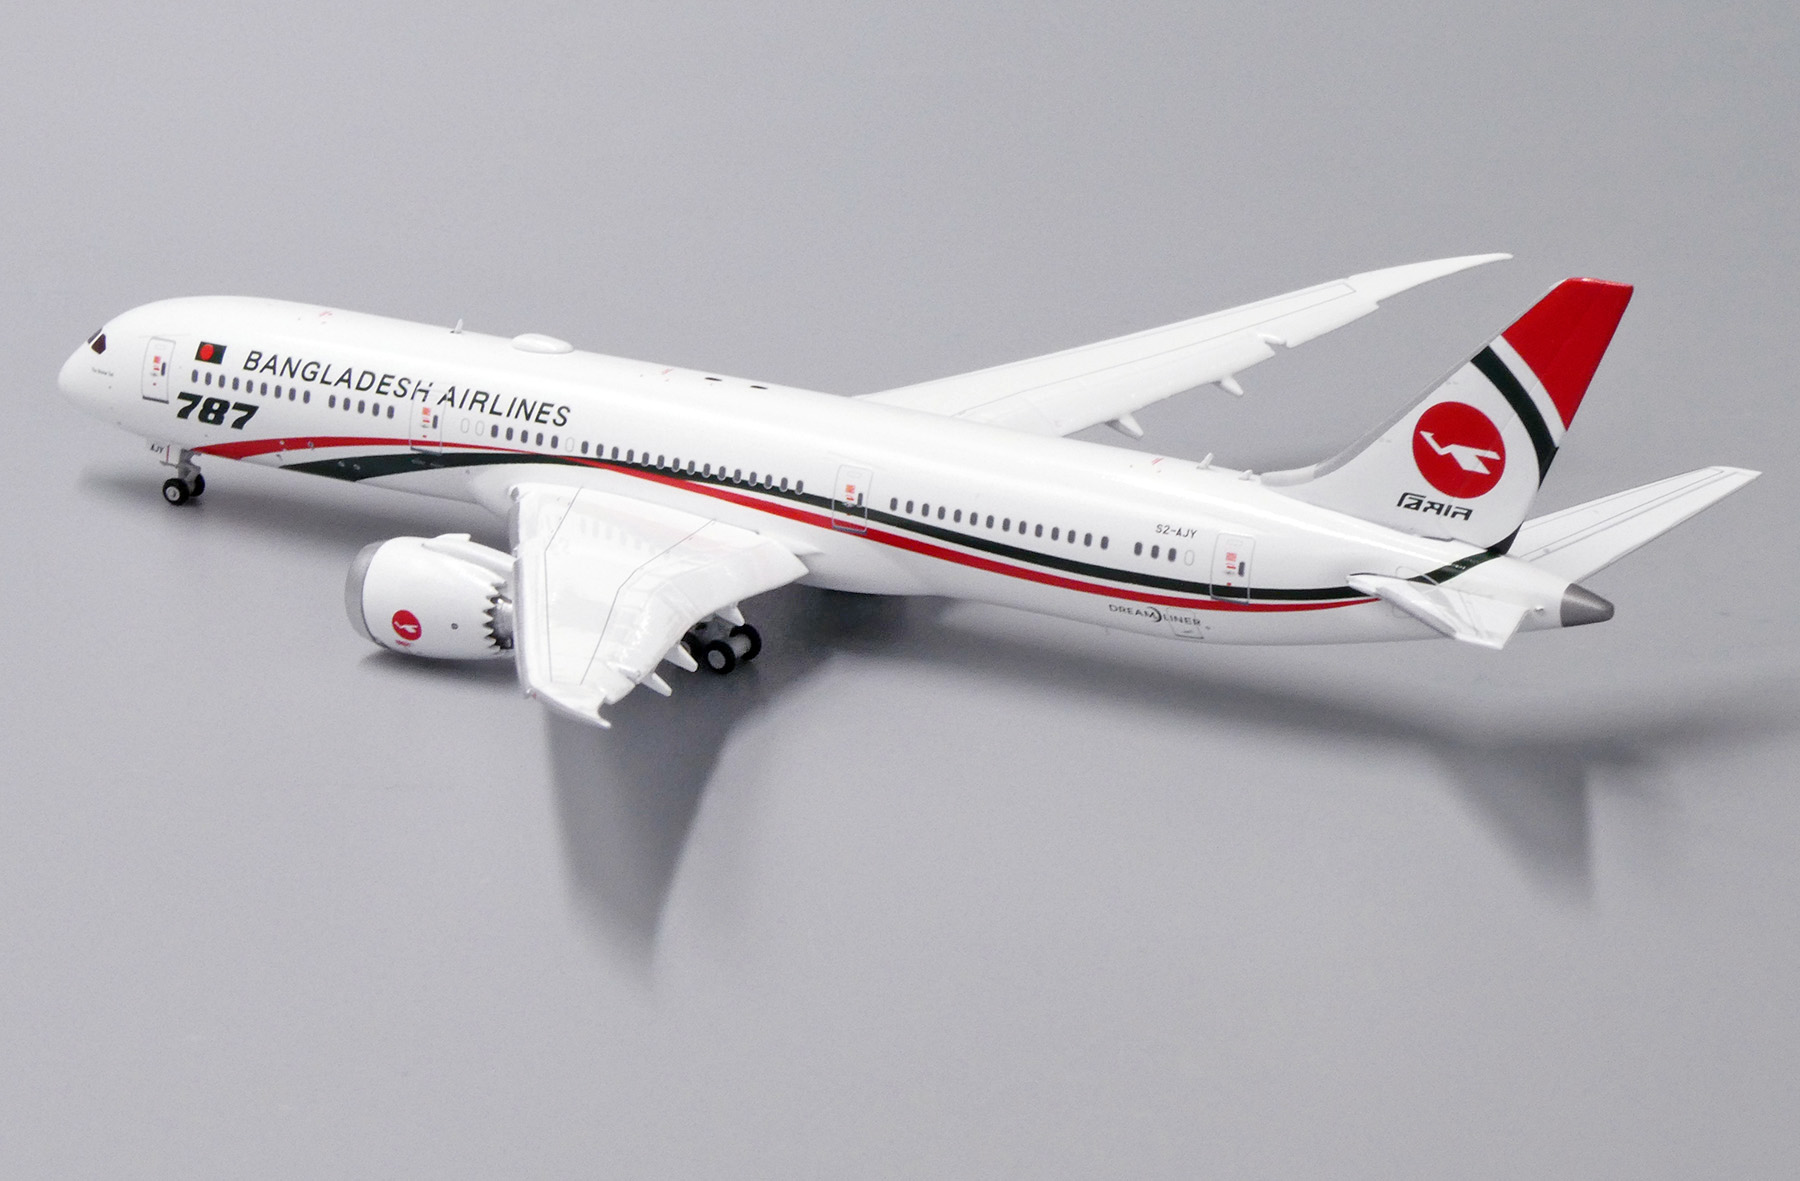 Details about   JC Wings 1:400 Biman Bangladesh Airlines B787-9 Diecast Aircraft Model S2-AJY 